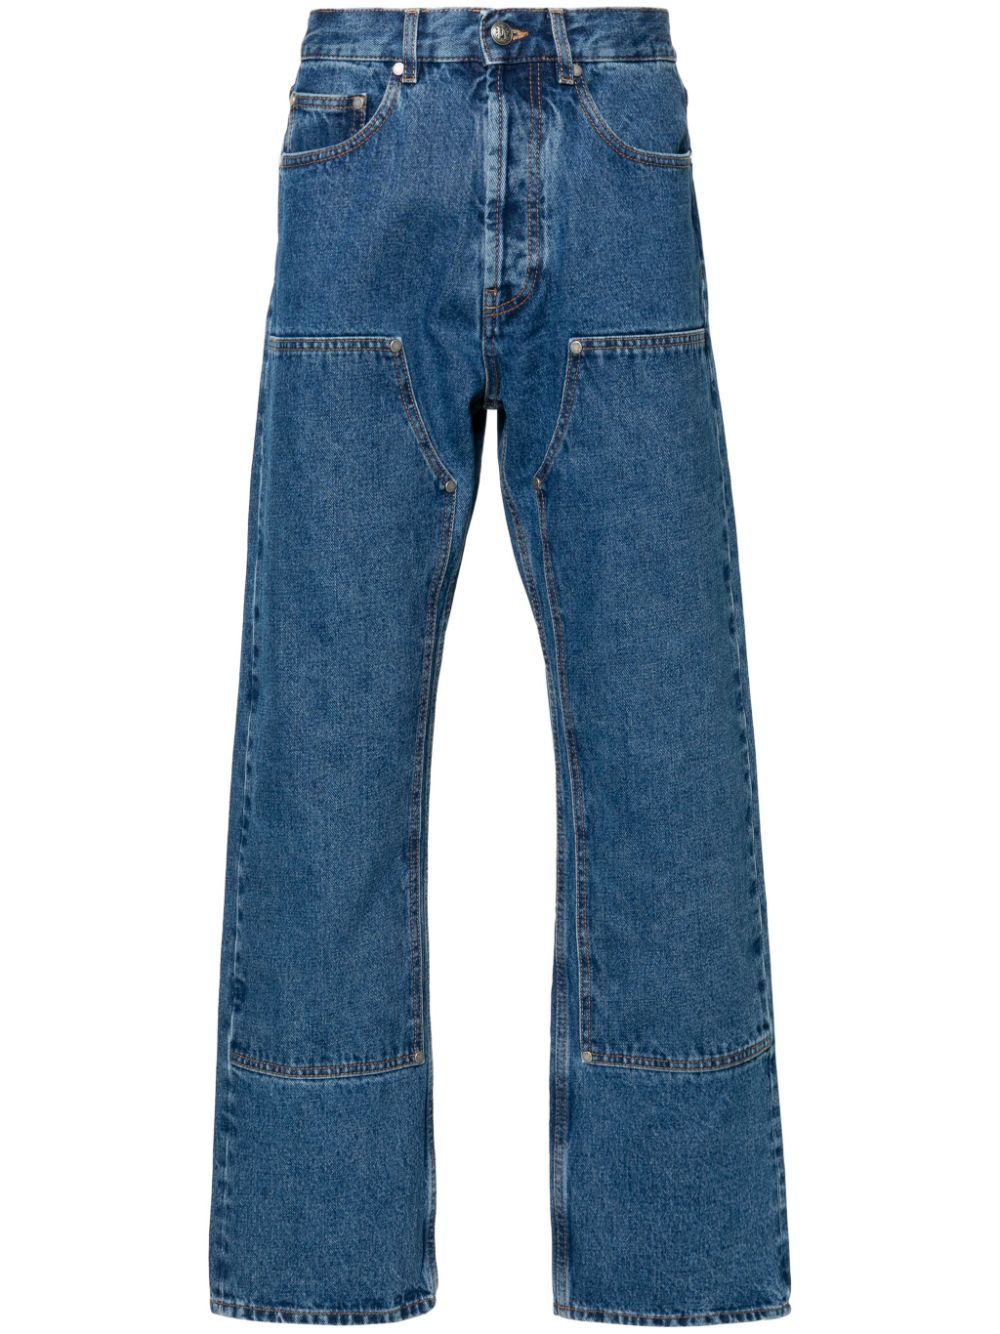 Urban Sophistication Mid-Washed Cotton Jeans for Men by Palm Angels